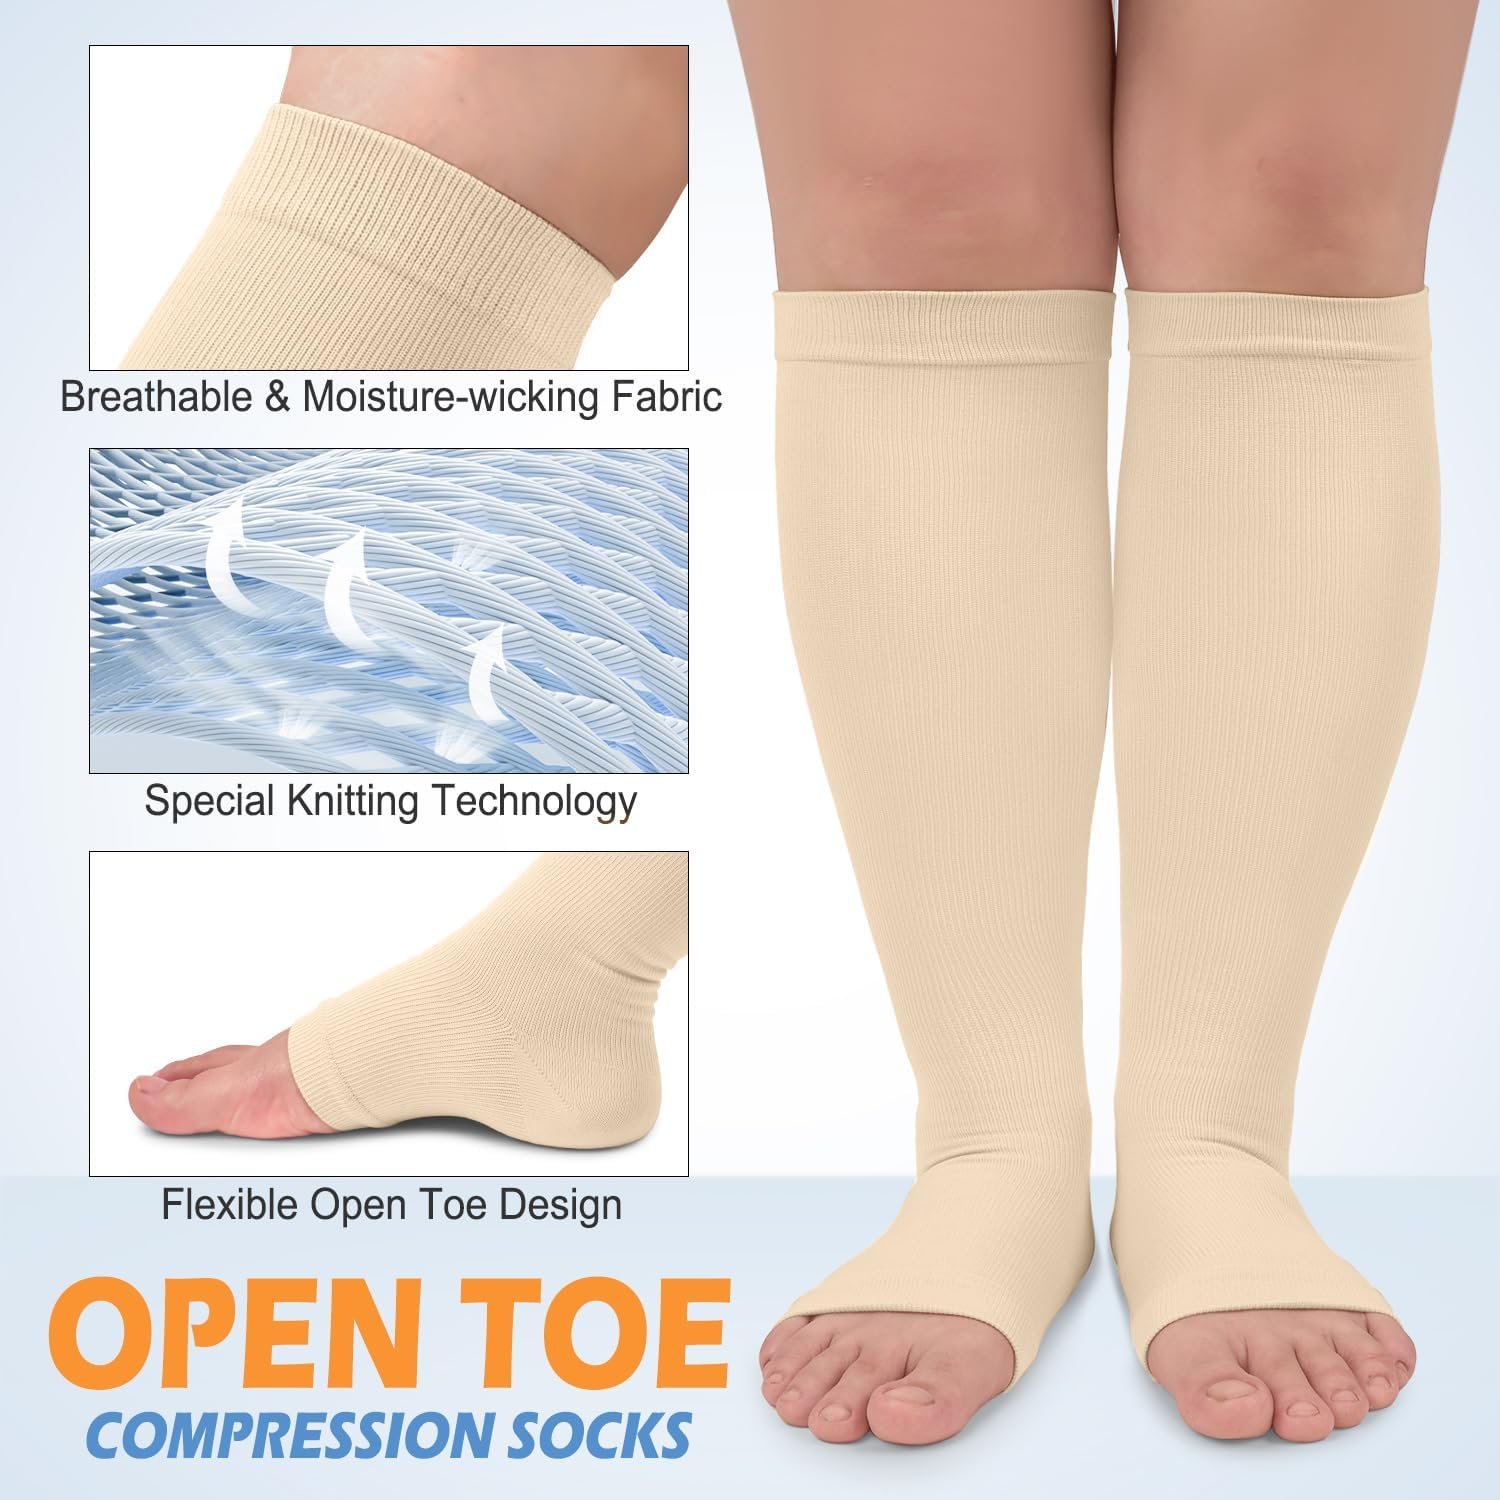 Open Toe Knee High Stockings Review